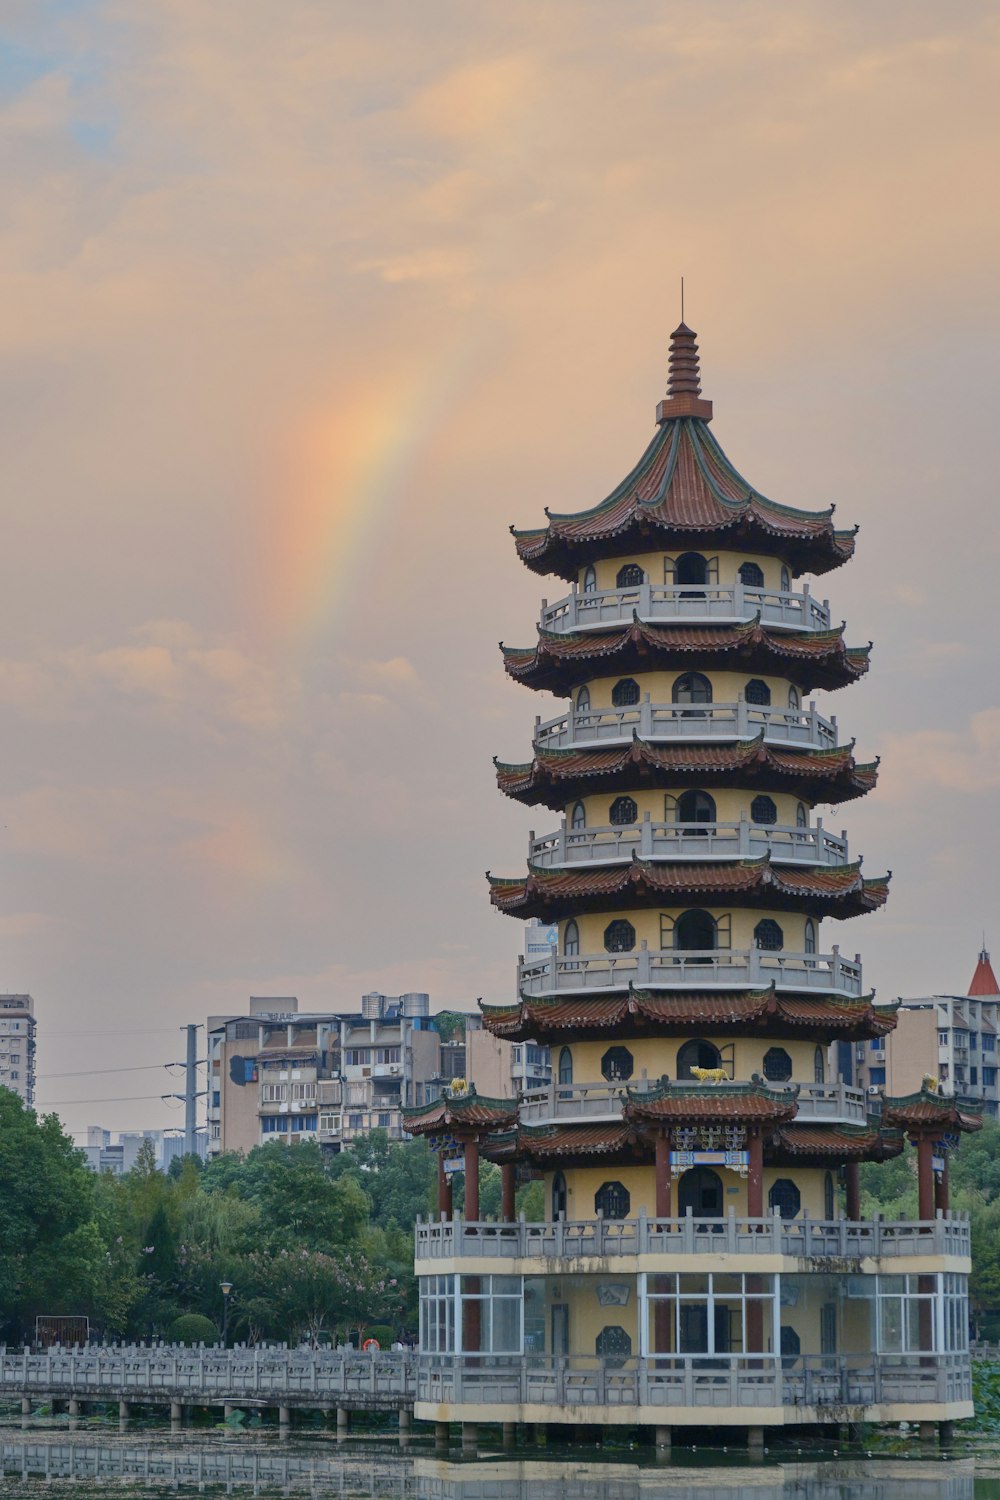 a tall building with a rainbow in the background